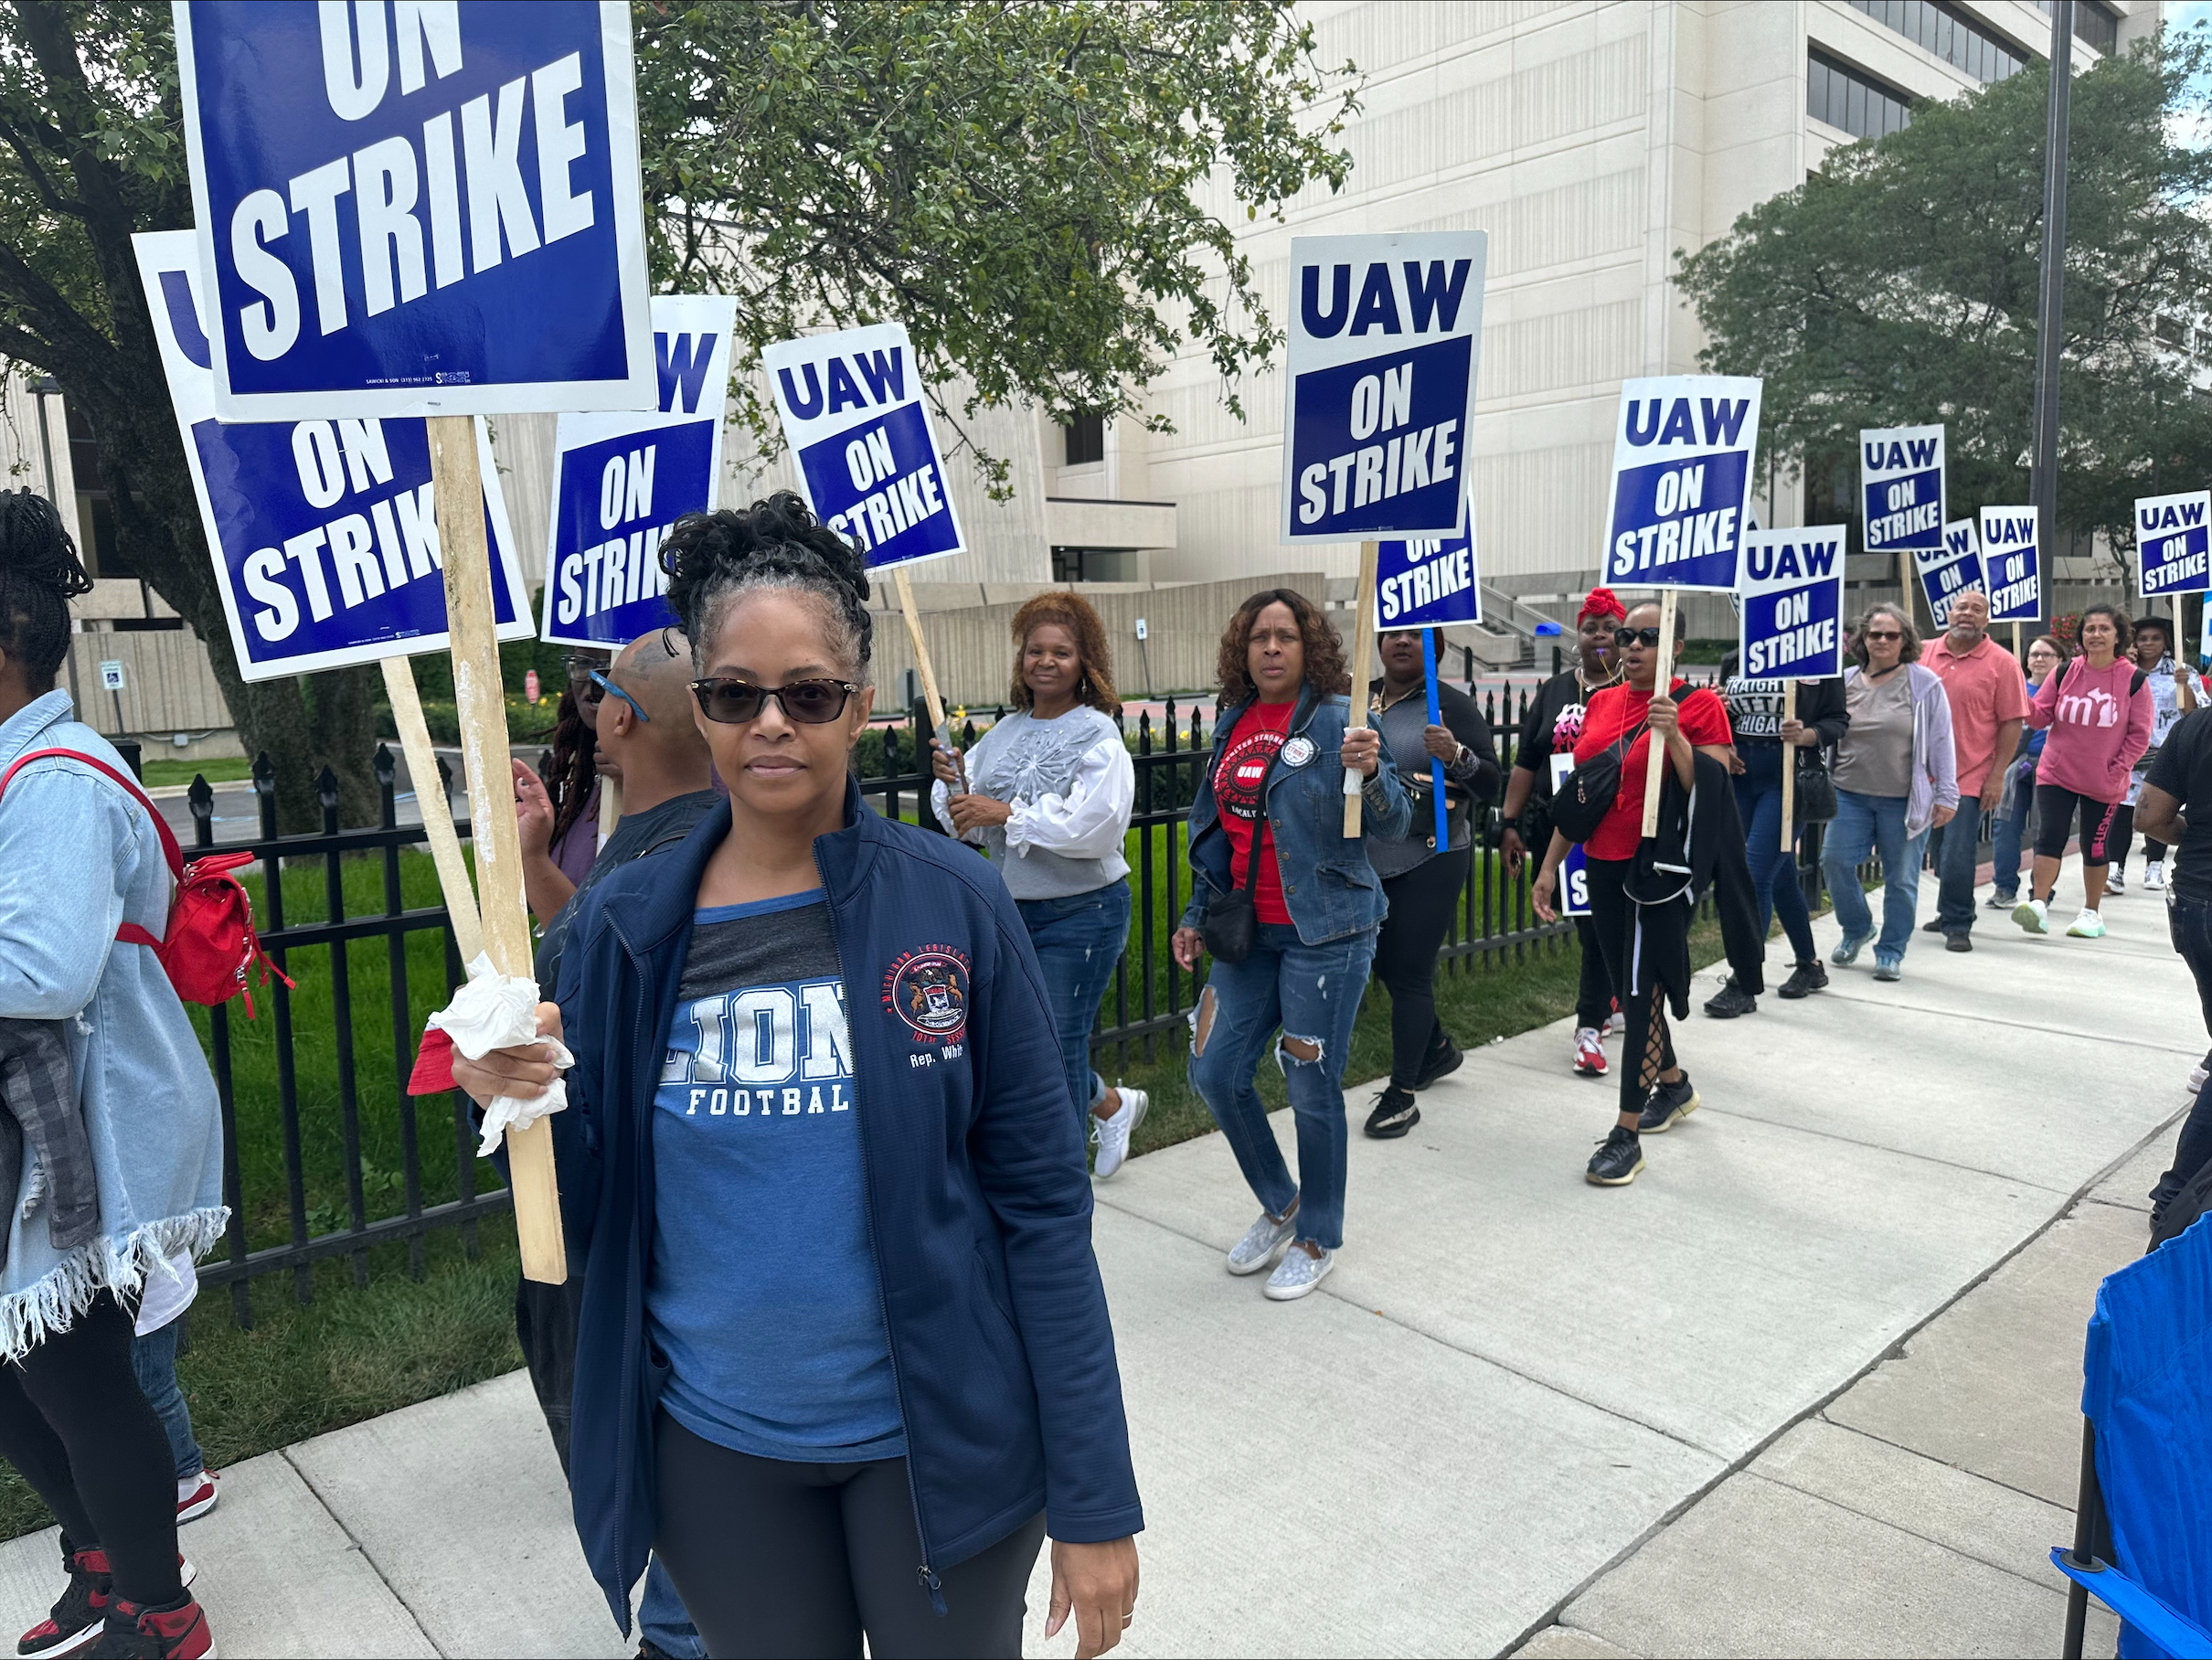 Michigan Rep. Karen Whitsett (D-Detroit) on the picket line with UAW workers in solidarity.